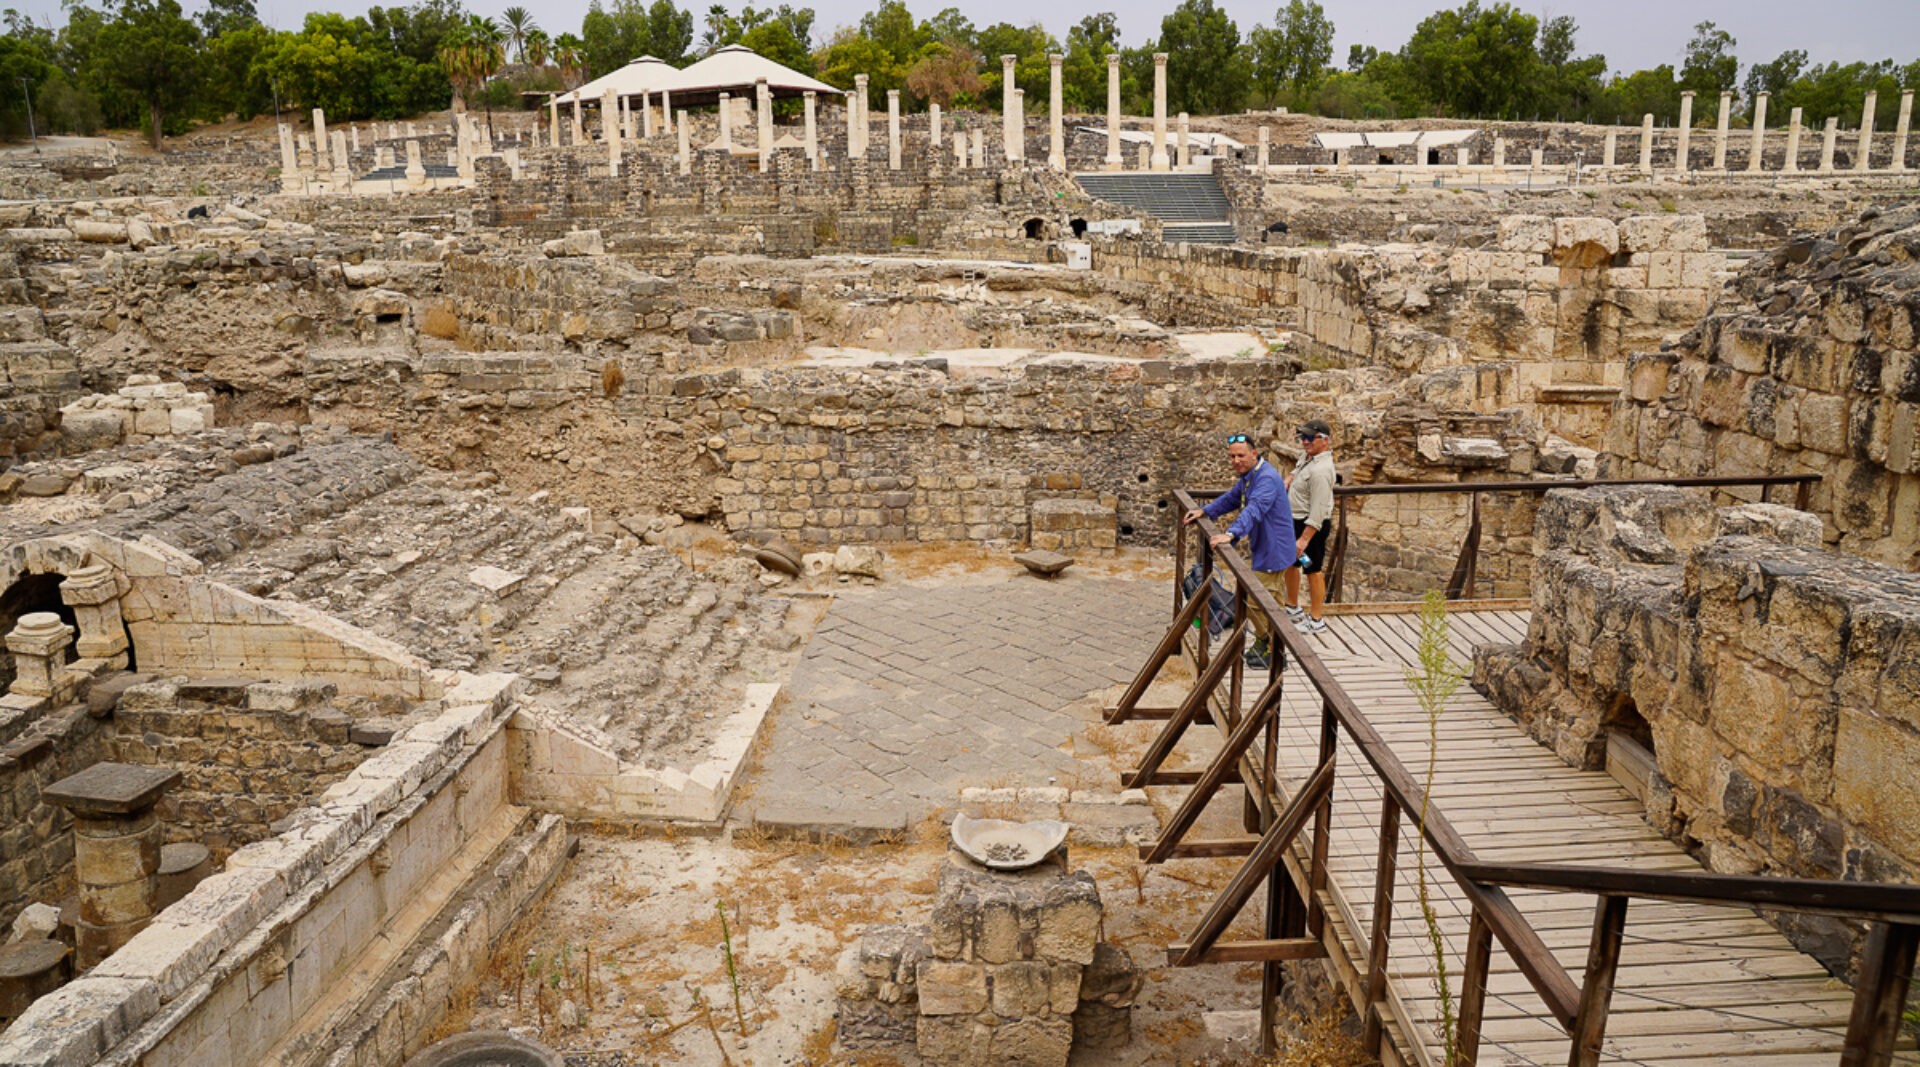 What Happened at These Archaeological Sites in Israel?